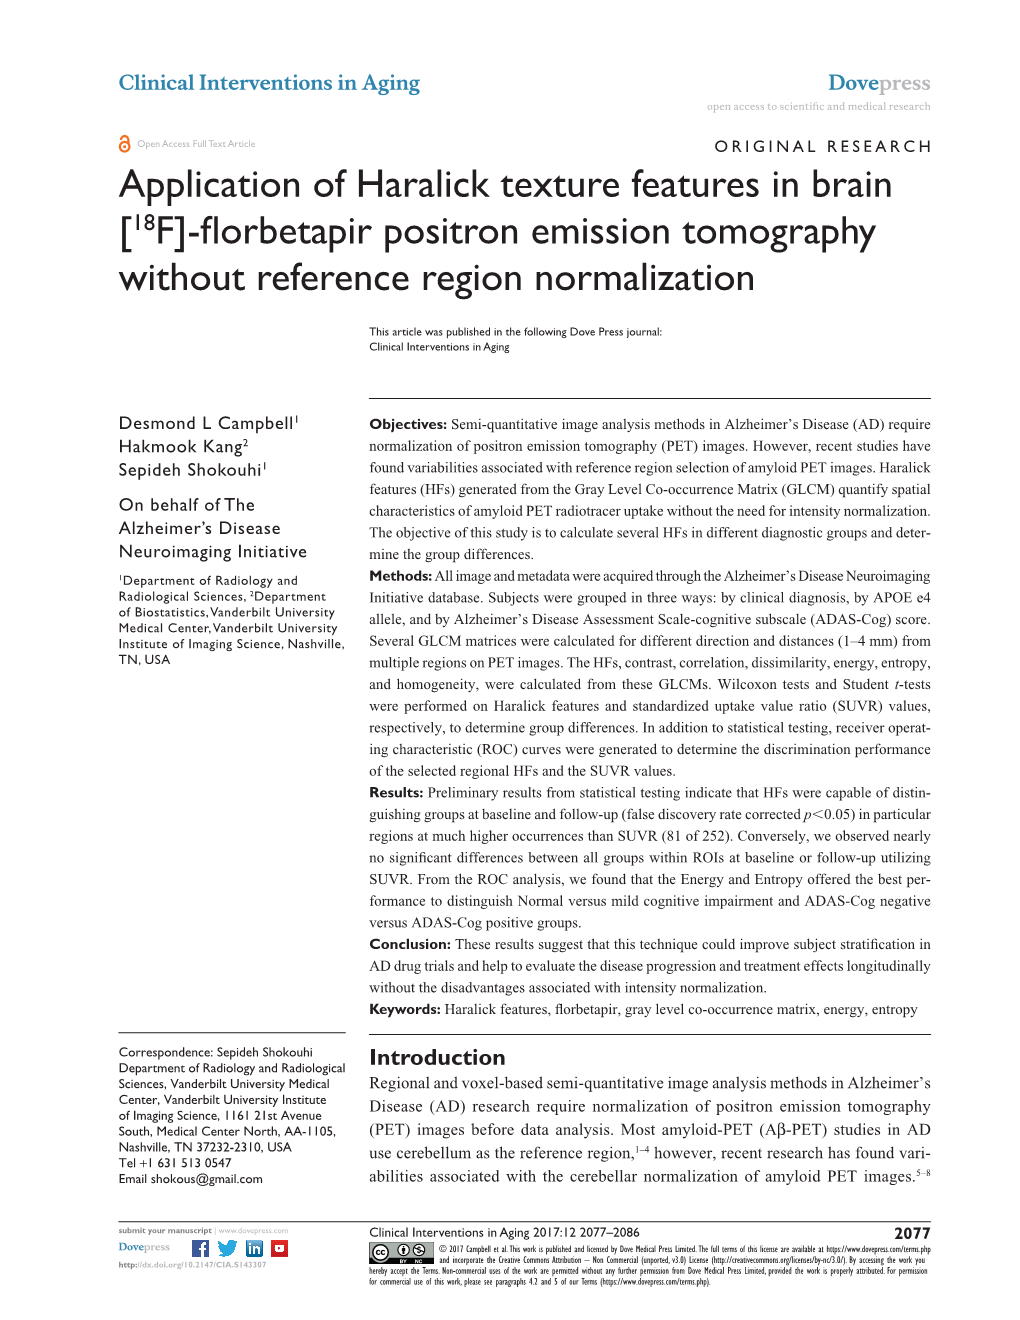 Application of Haralick Texture Features in Brain [18F]-Florbetapir Positron Emission Tomography Without Reference Region Normalization